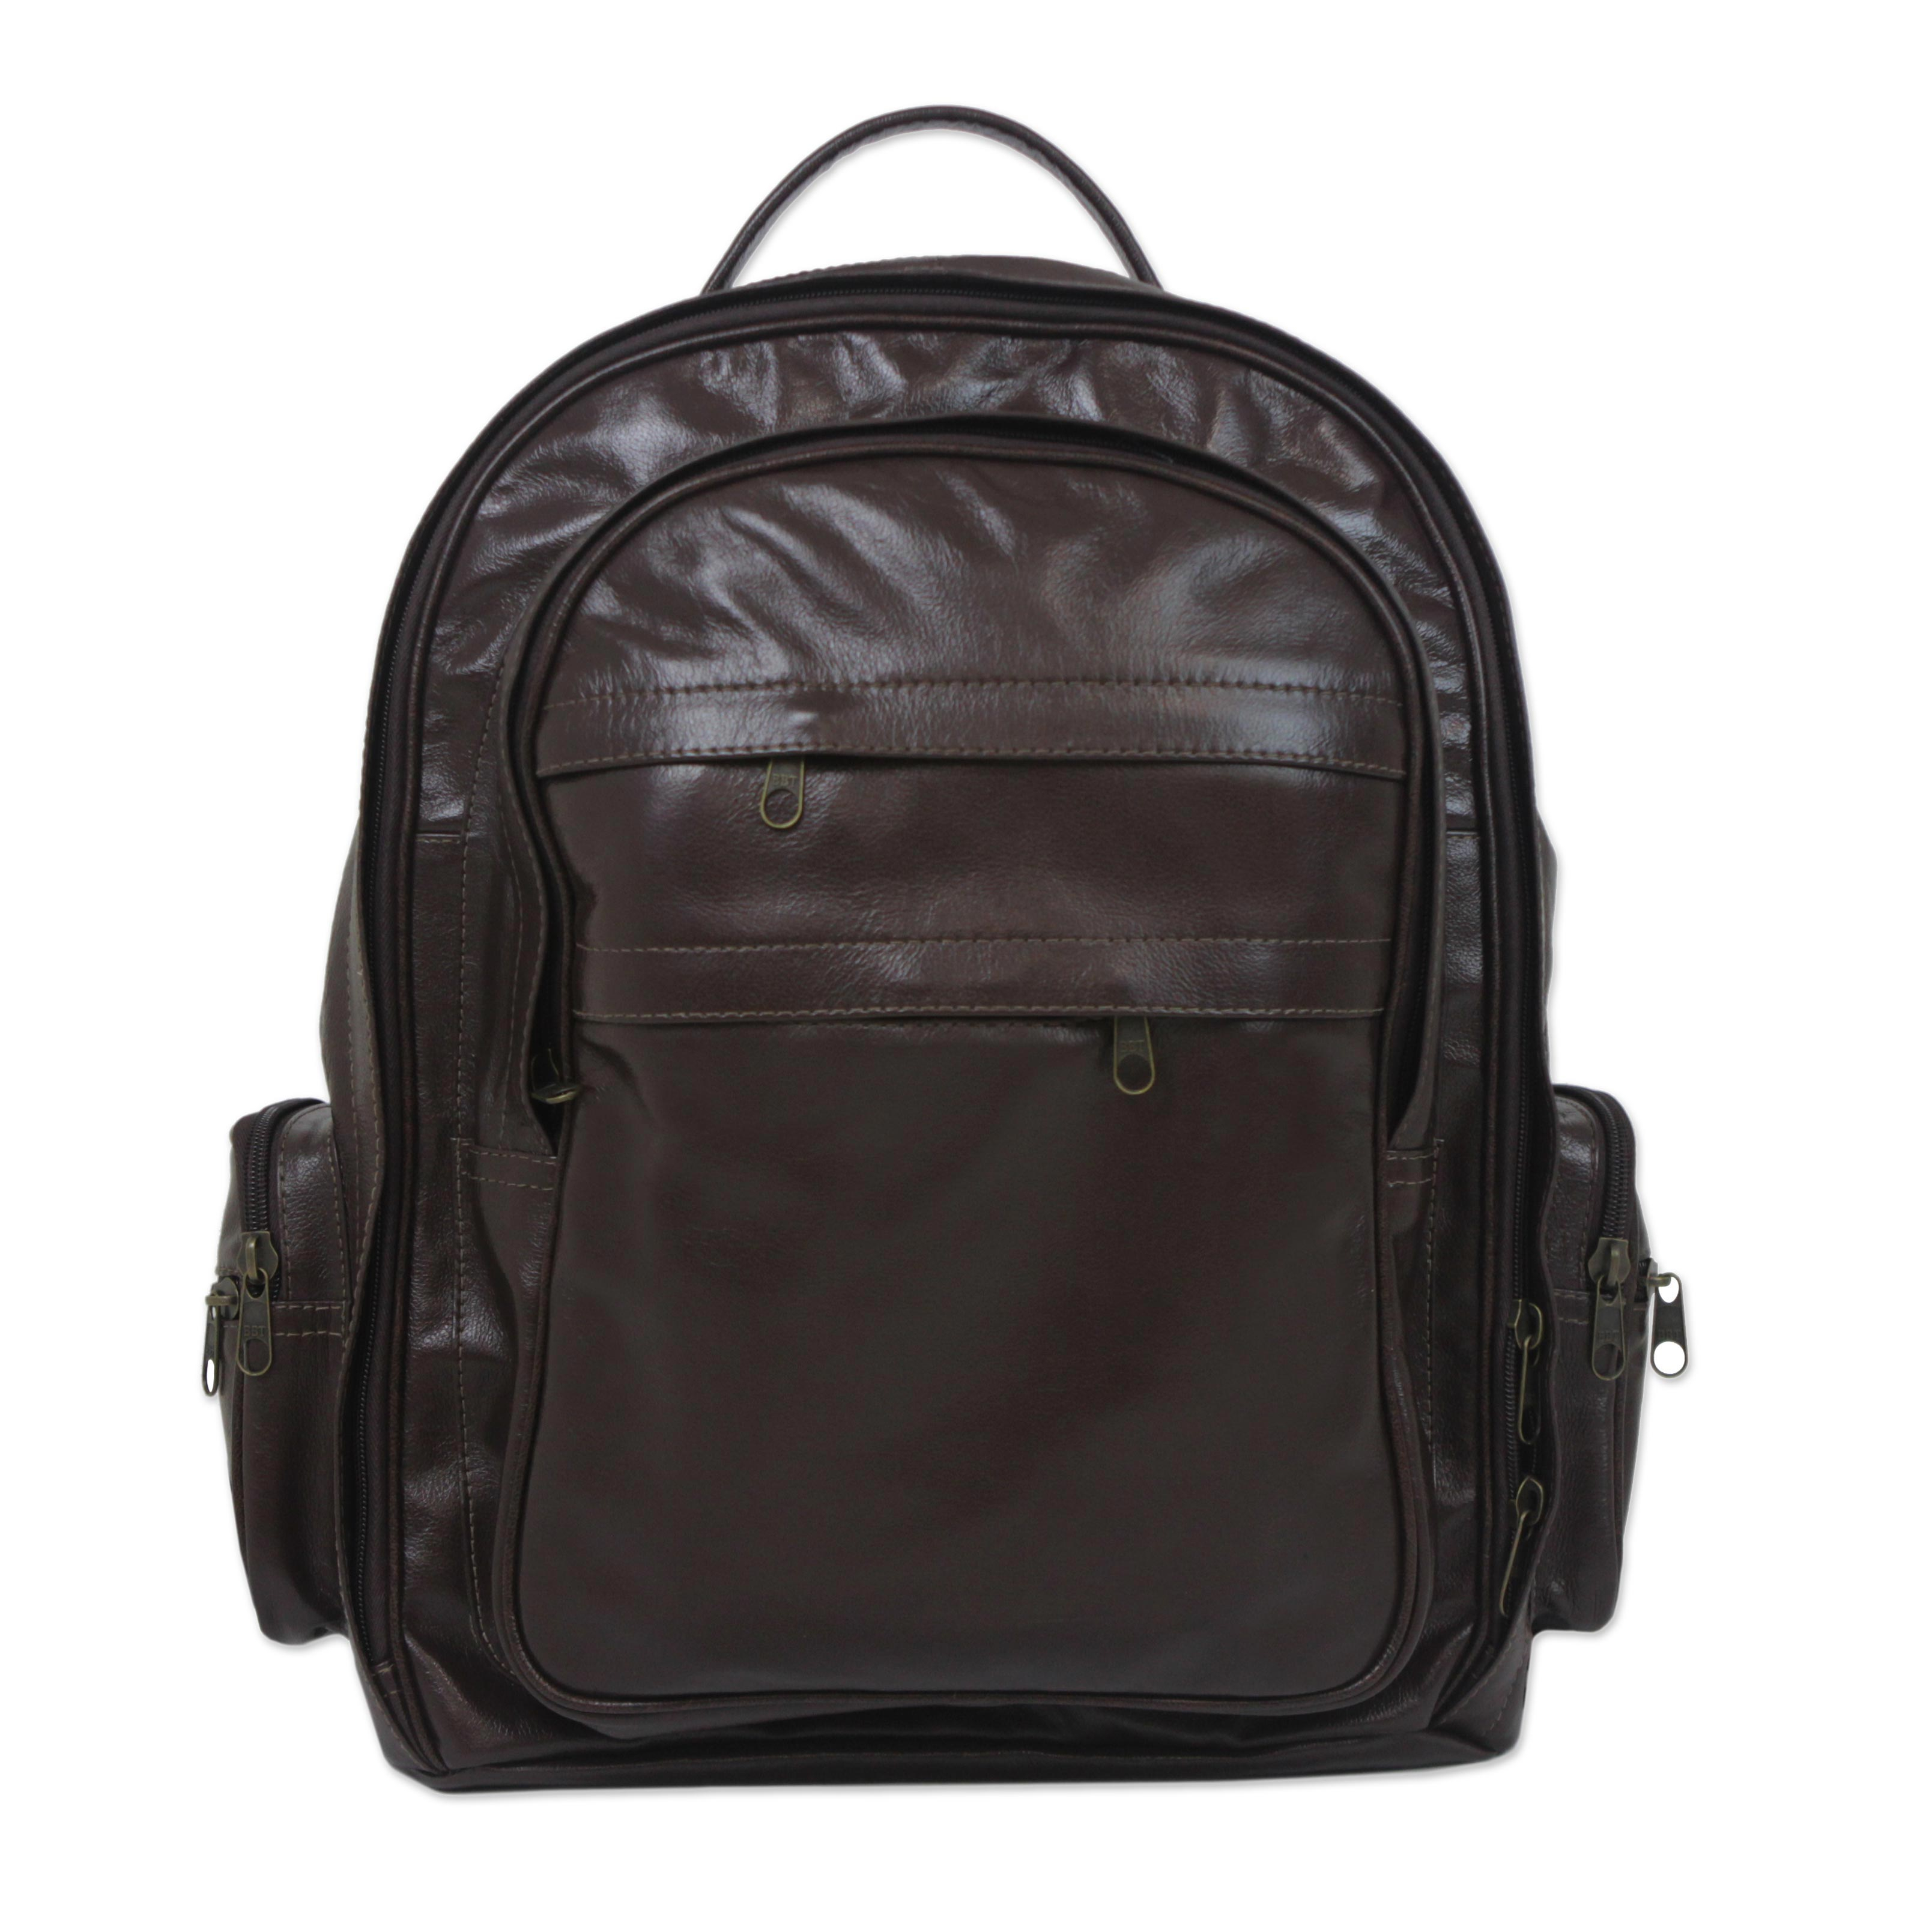 UNICEF Market | Handcrafted Leather Backpack in Chocolate from Brazil ...